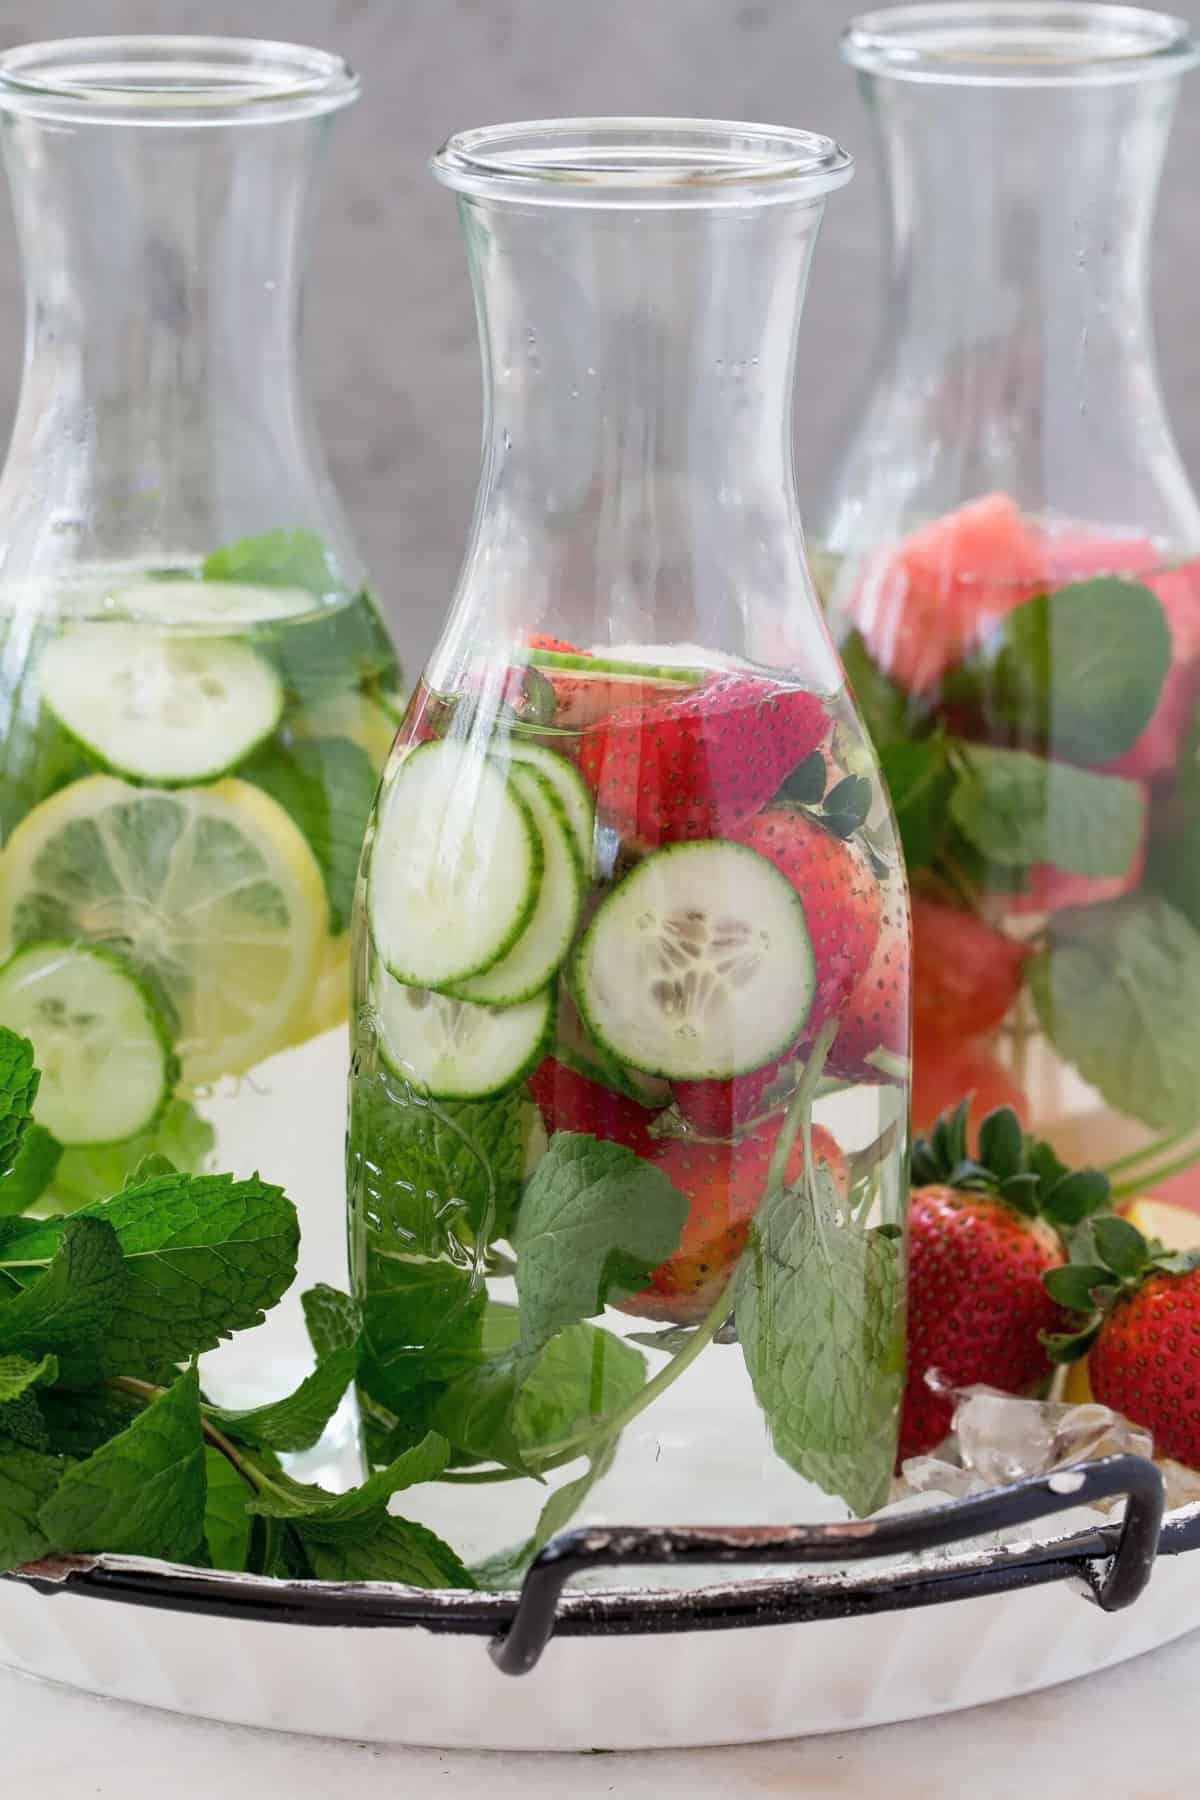 Infused Water With Fresh Fruit! - Cook Clean Repeat